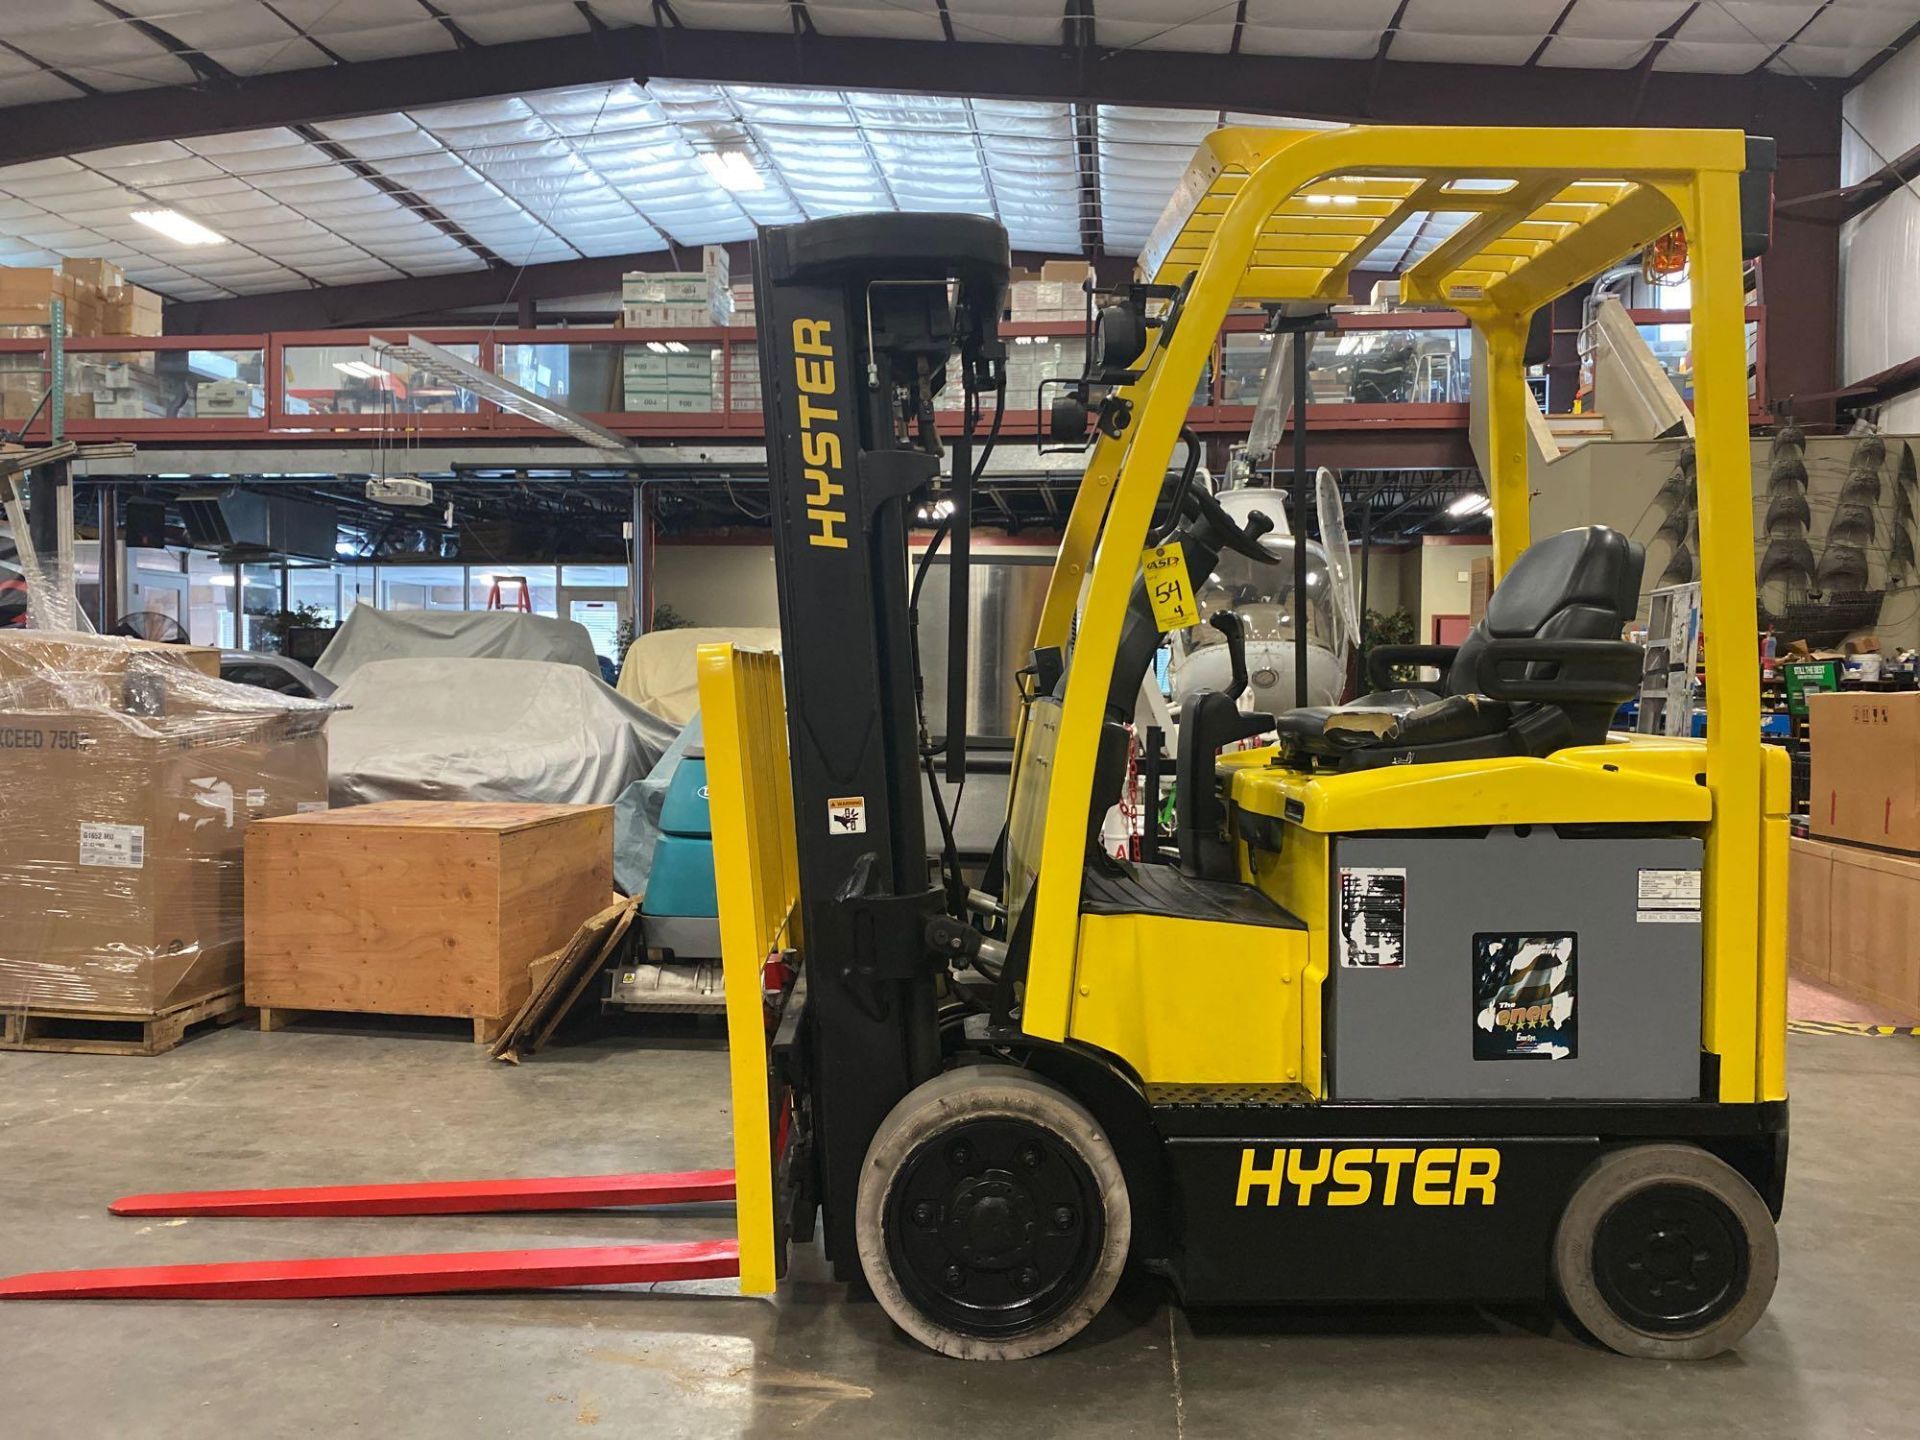 2011 HYSTER E50XN-27 ELECTRIC FORKLIFT, APPROX 5,000 LB CAPACITY, 240.2" HEIGHT CAPACITY, TILT, SIDE